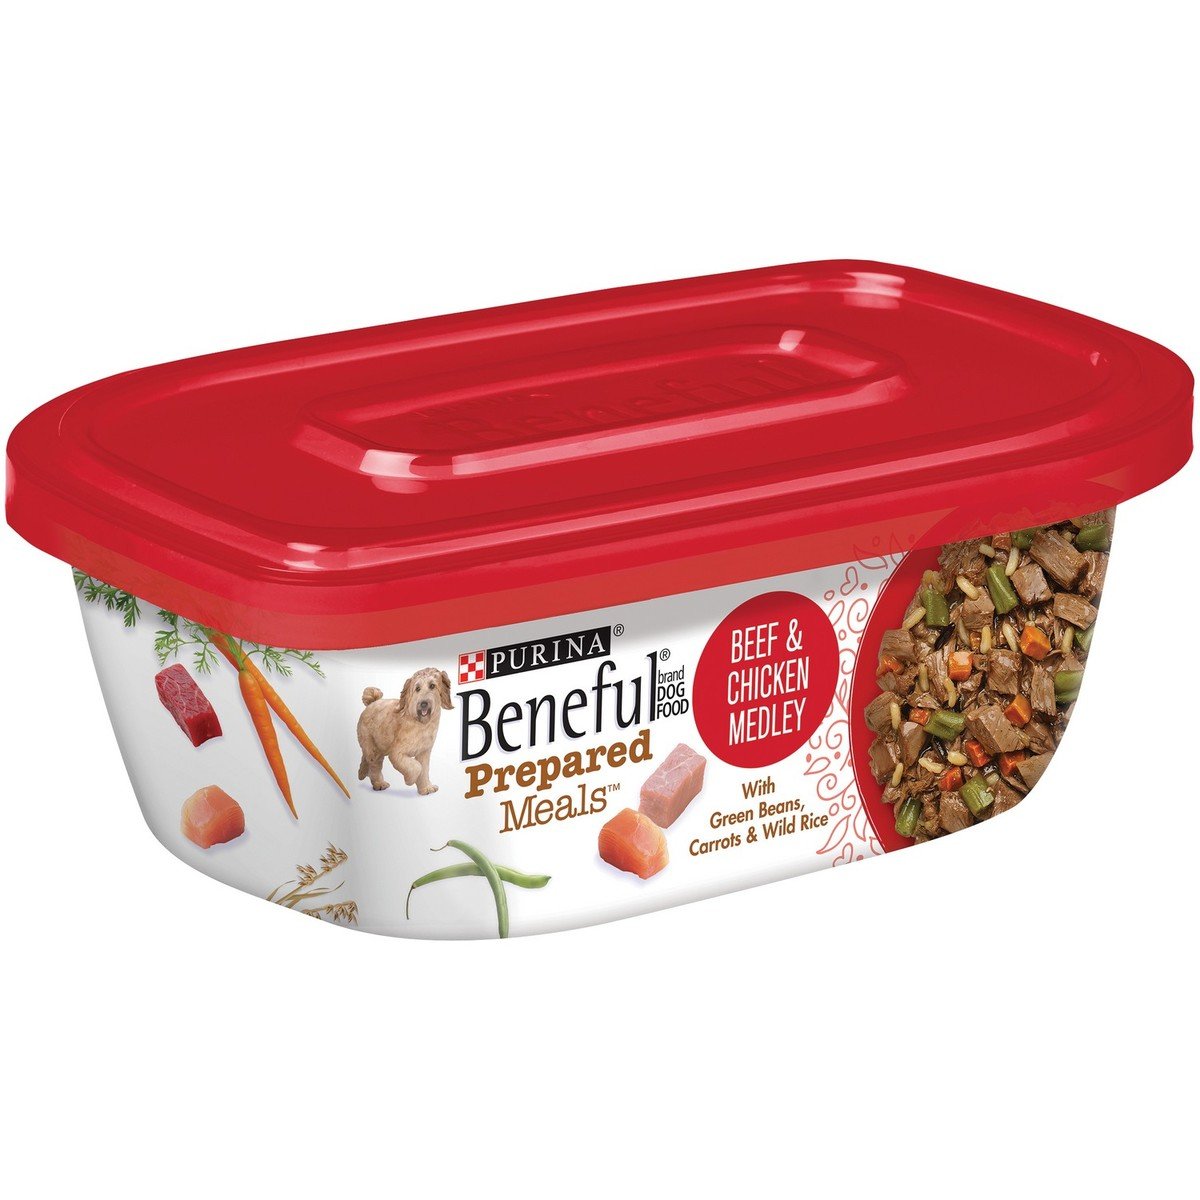 Purina Beneful Prepared Dog Food Meal Beef And Chicken Medley Tub 283 g